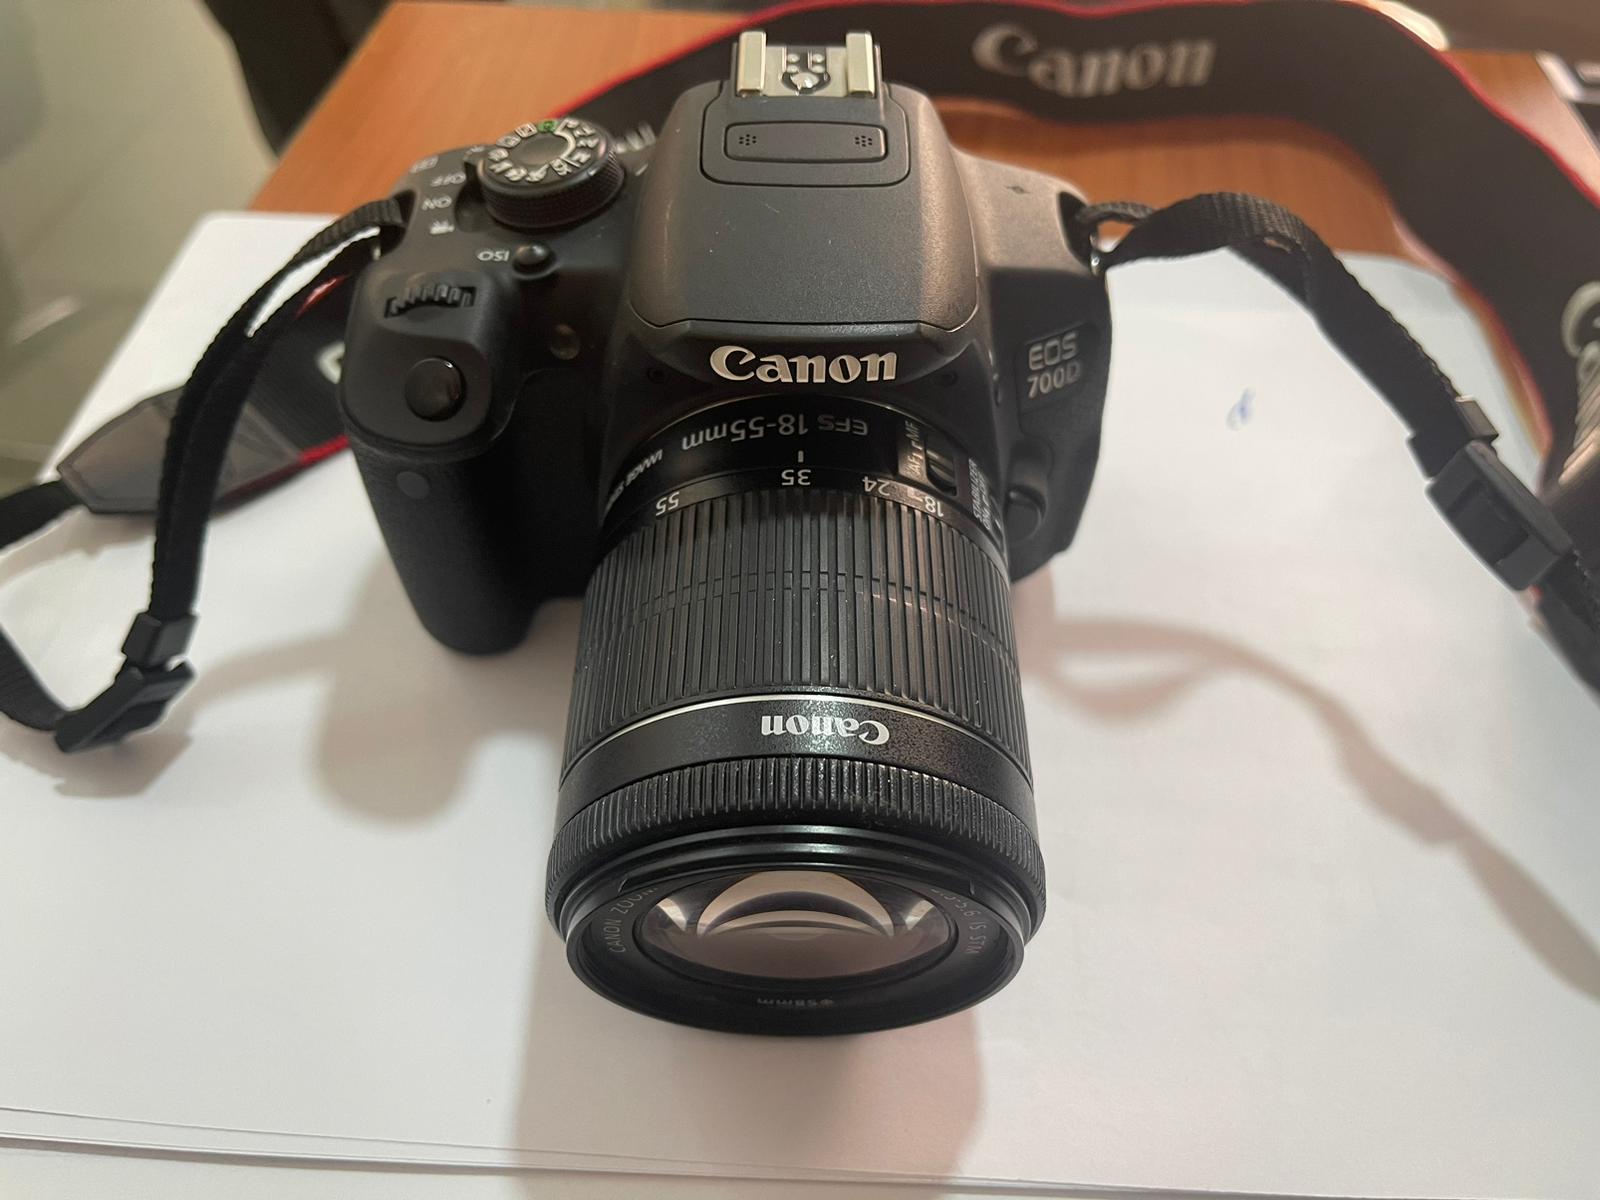 Used CANON DS126431 Camara for sale.